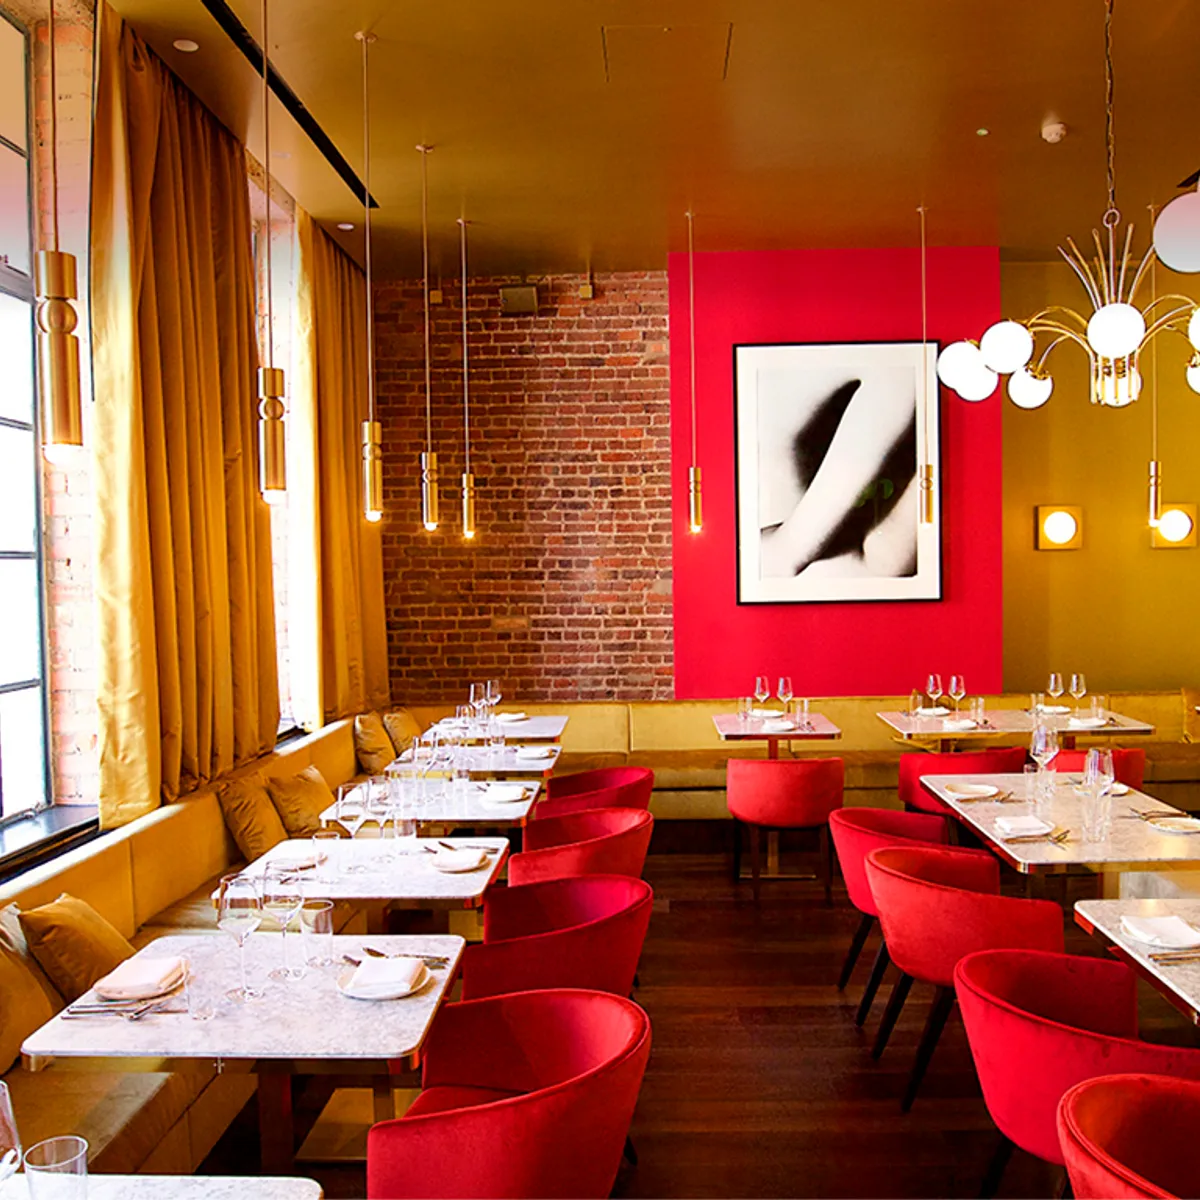 Gazelle Restaurant Red And Yellow Interior Design With Furniture By Inside Out Contracts